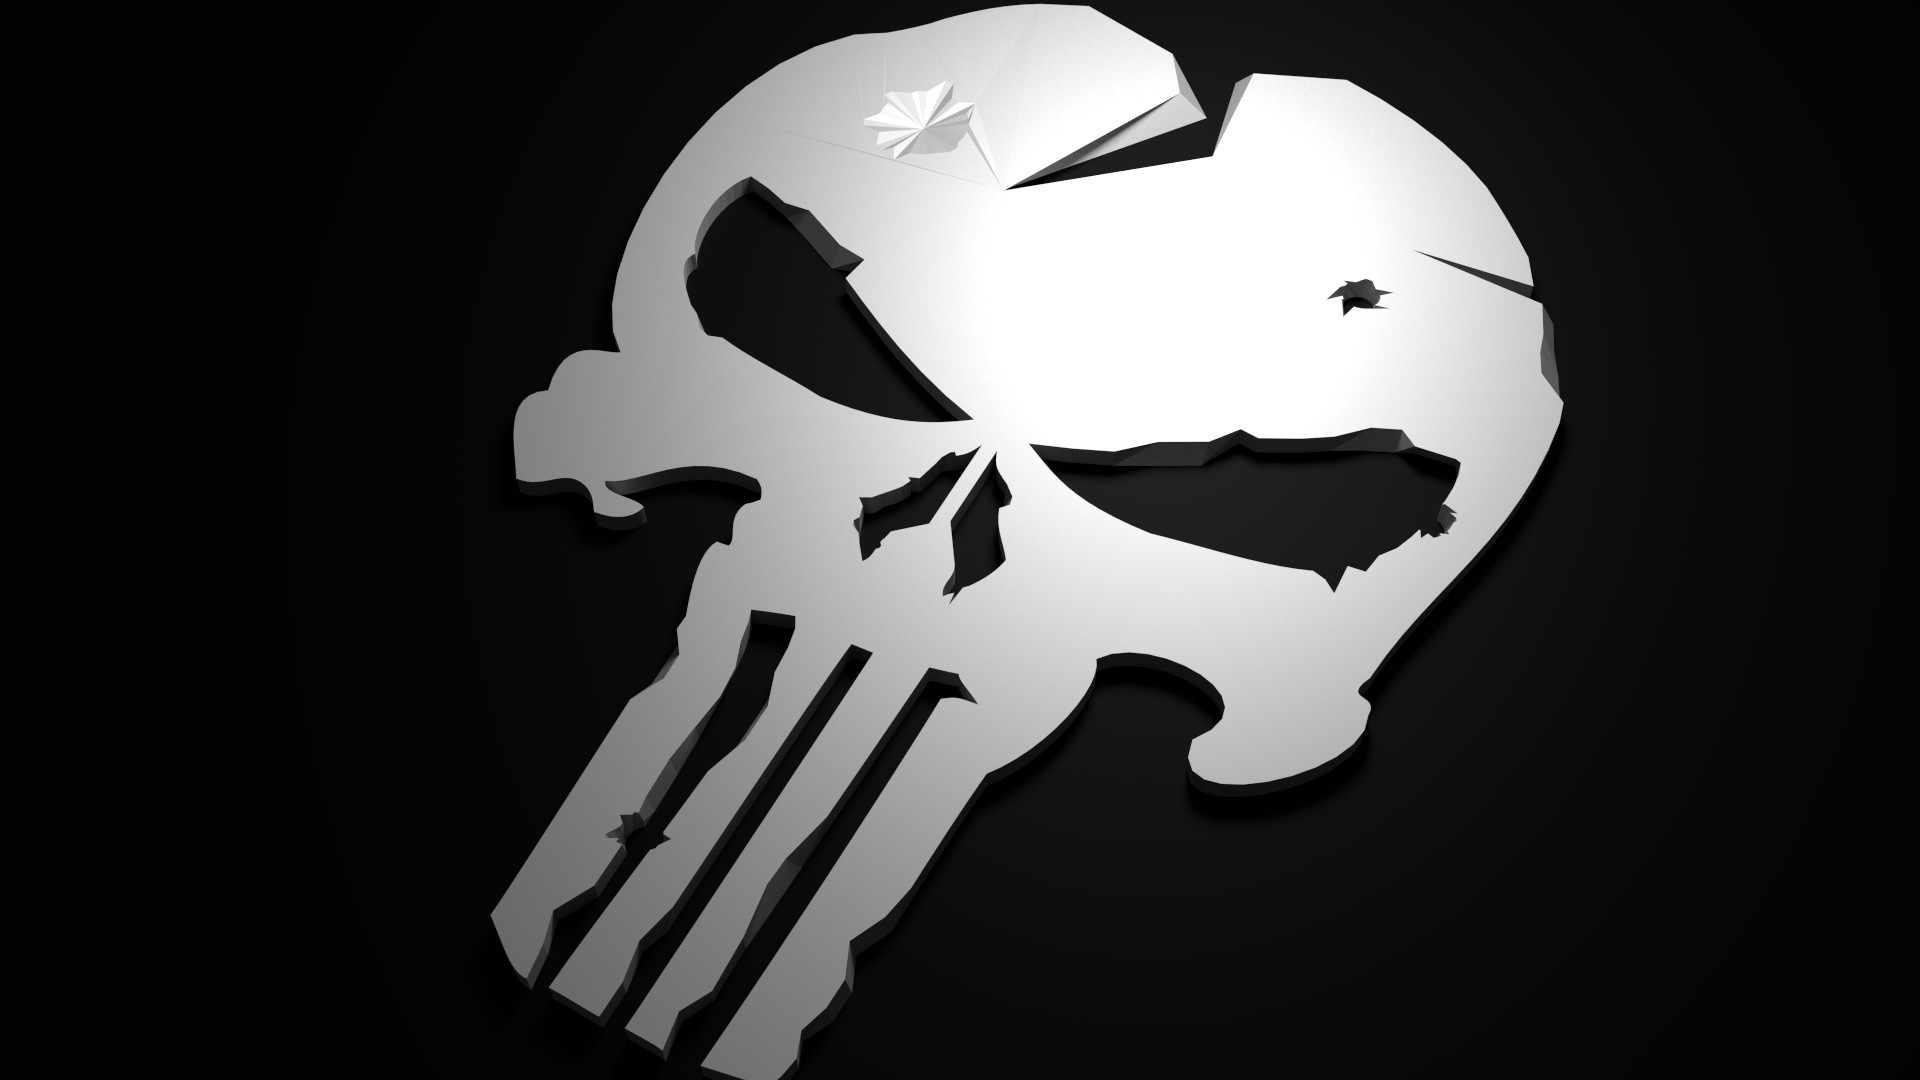 Low Poly Punisher (1920 x 1080) HD Wallpaper From Gallsource.com